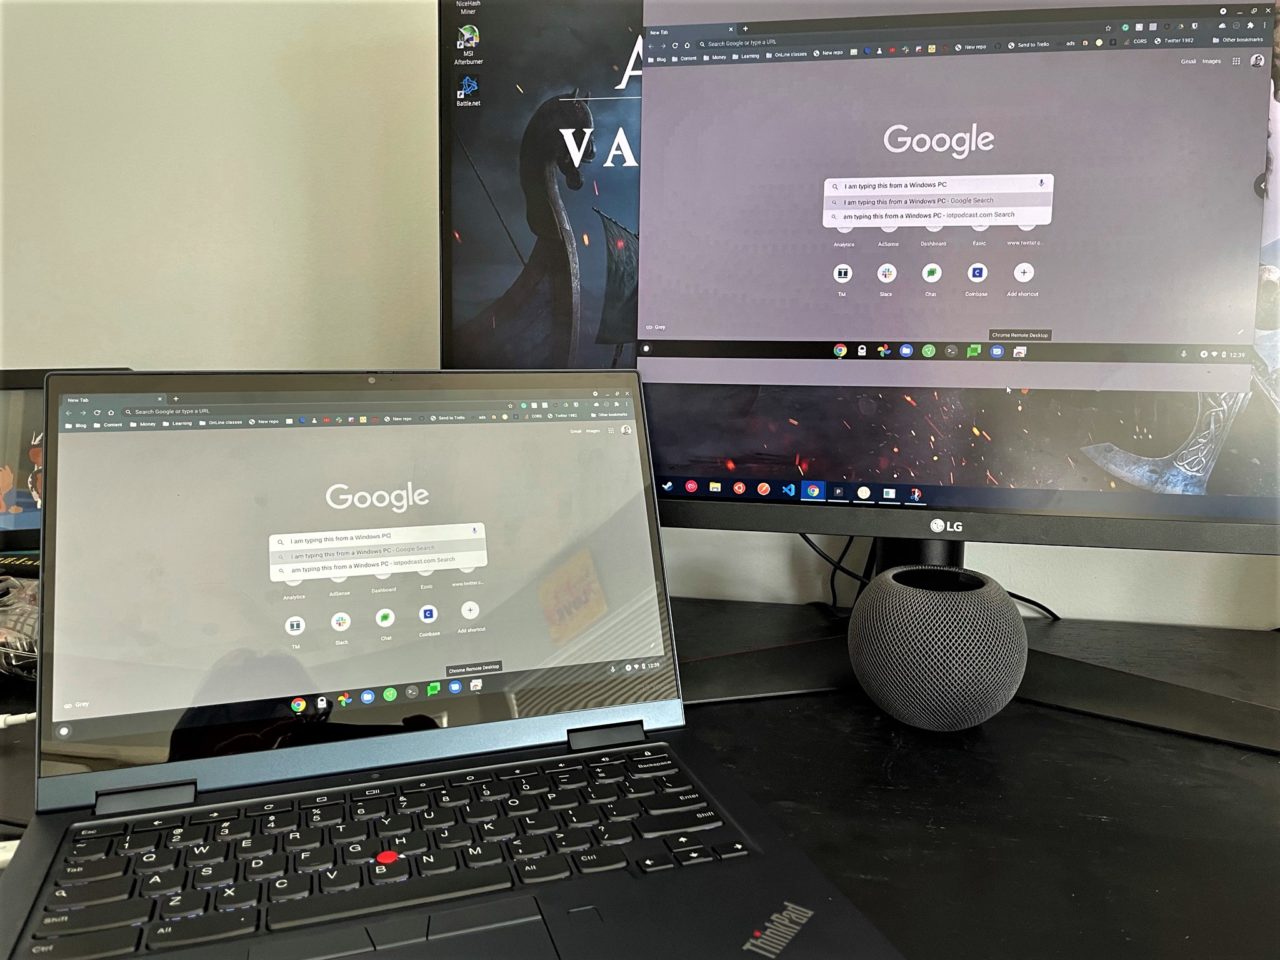 How to remotely control a Chromebook from another computer